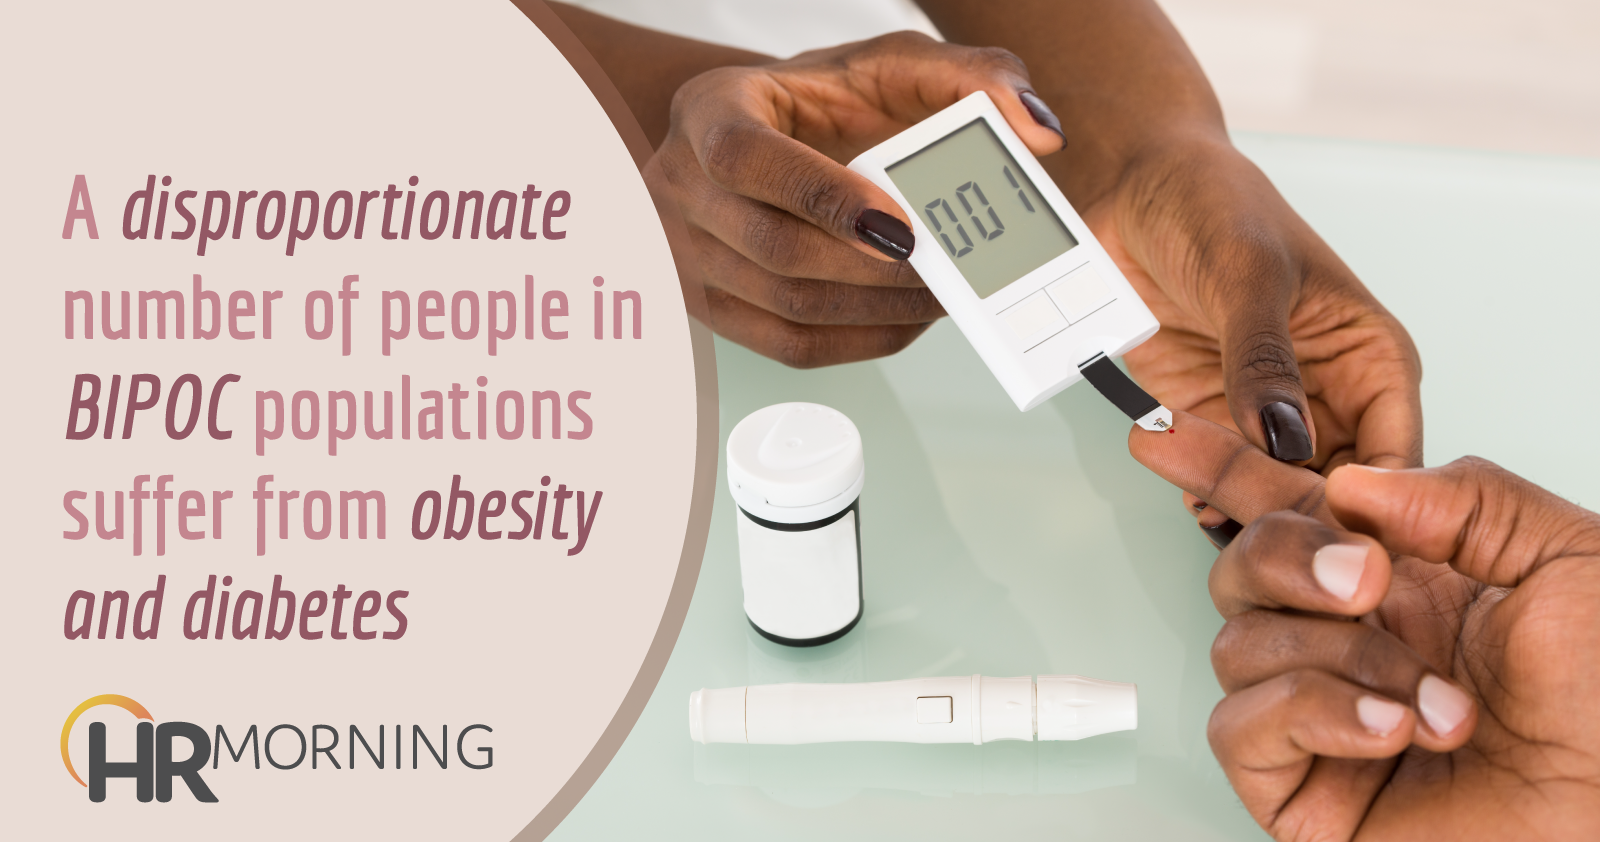 a disproportionate number of people in BIPOC populations suffer from obesity and diabetes